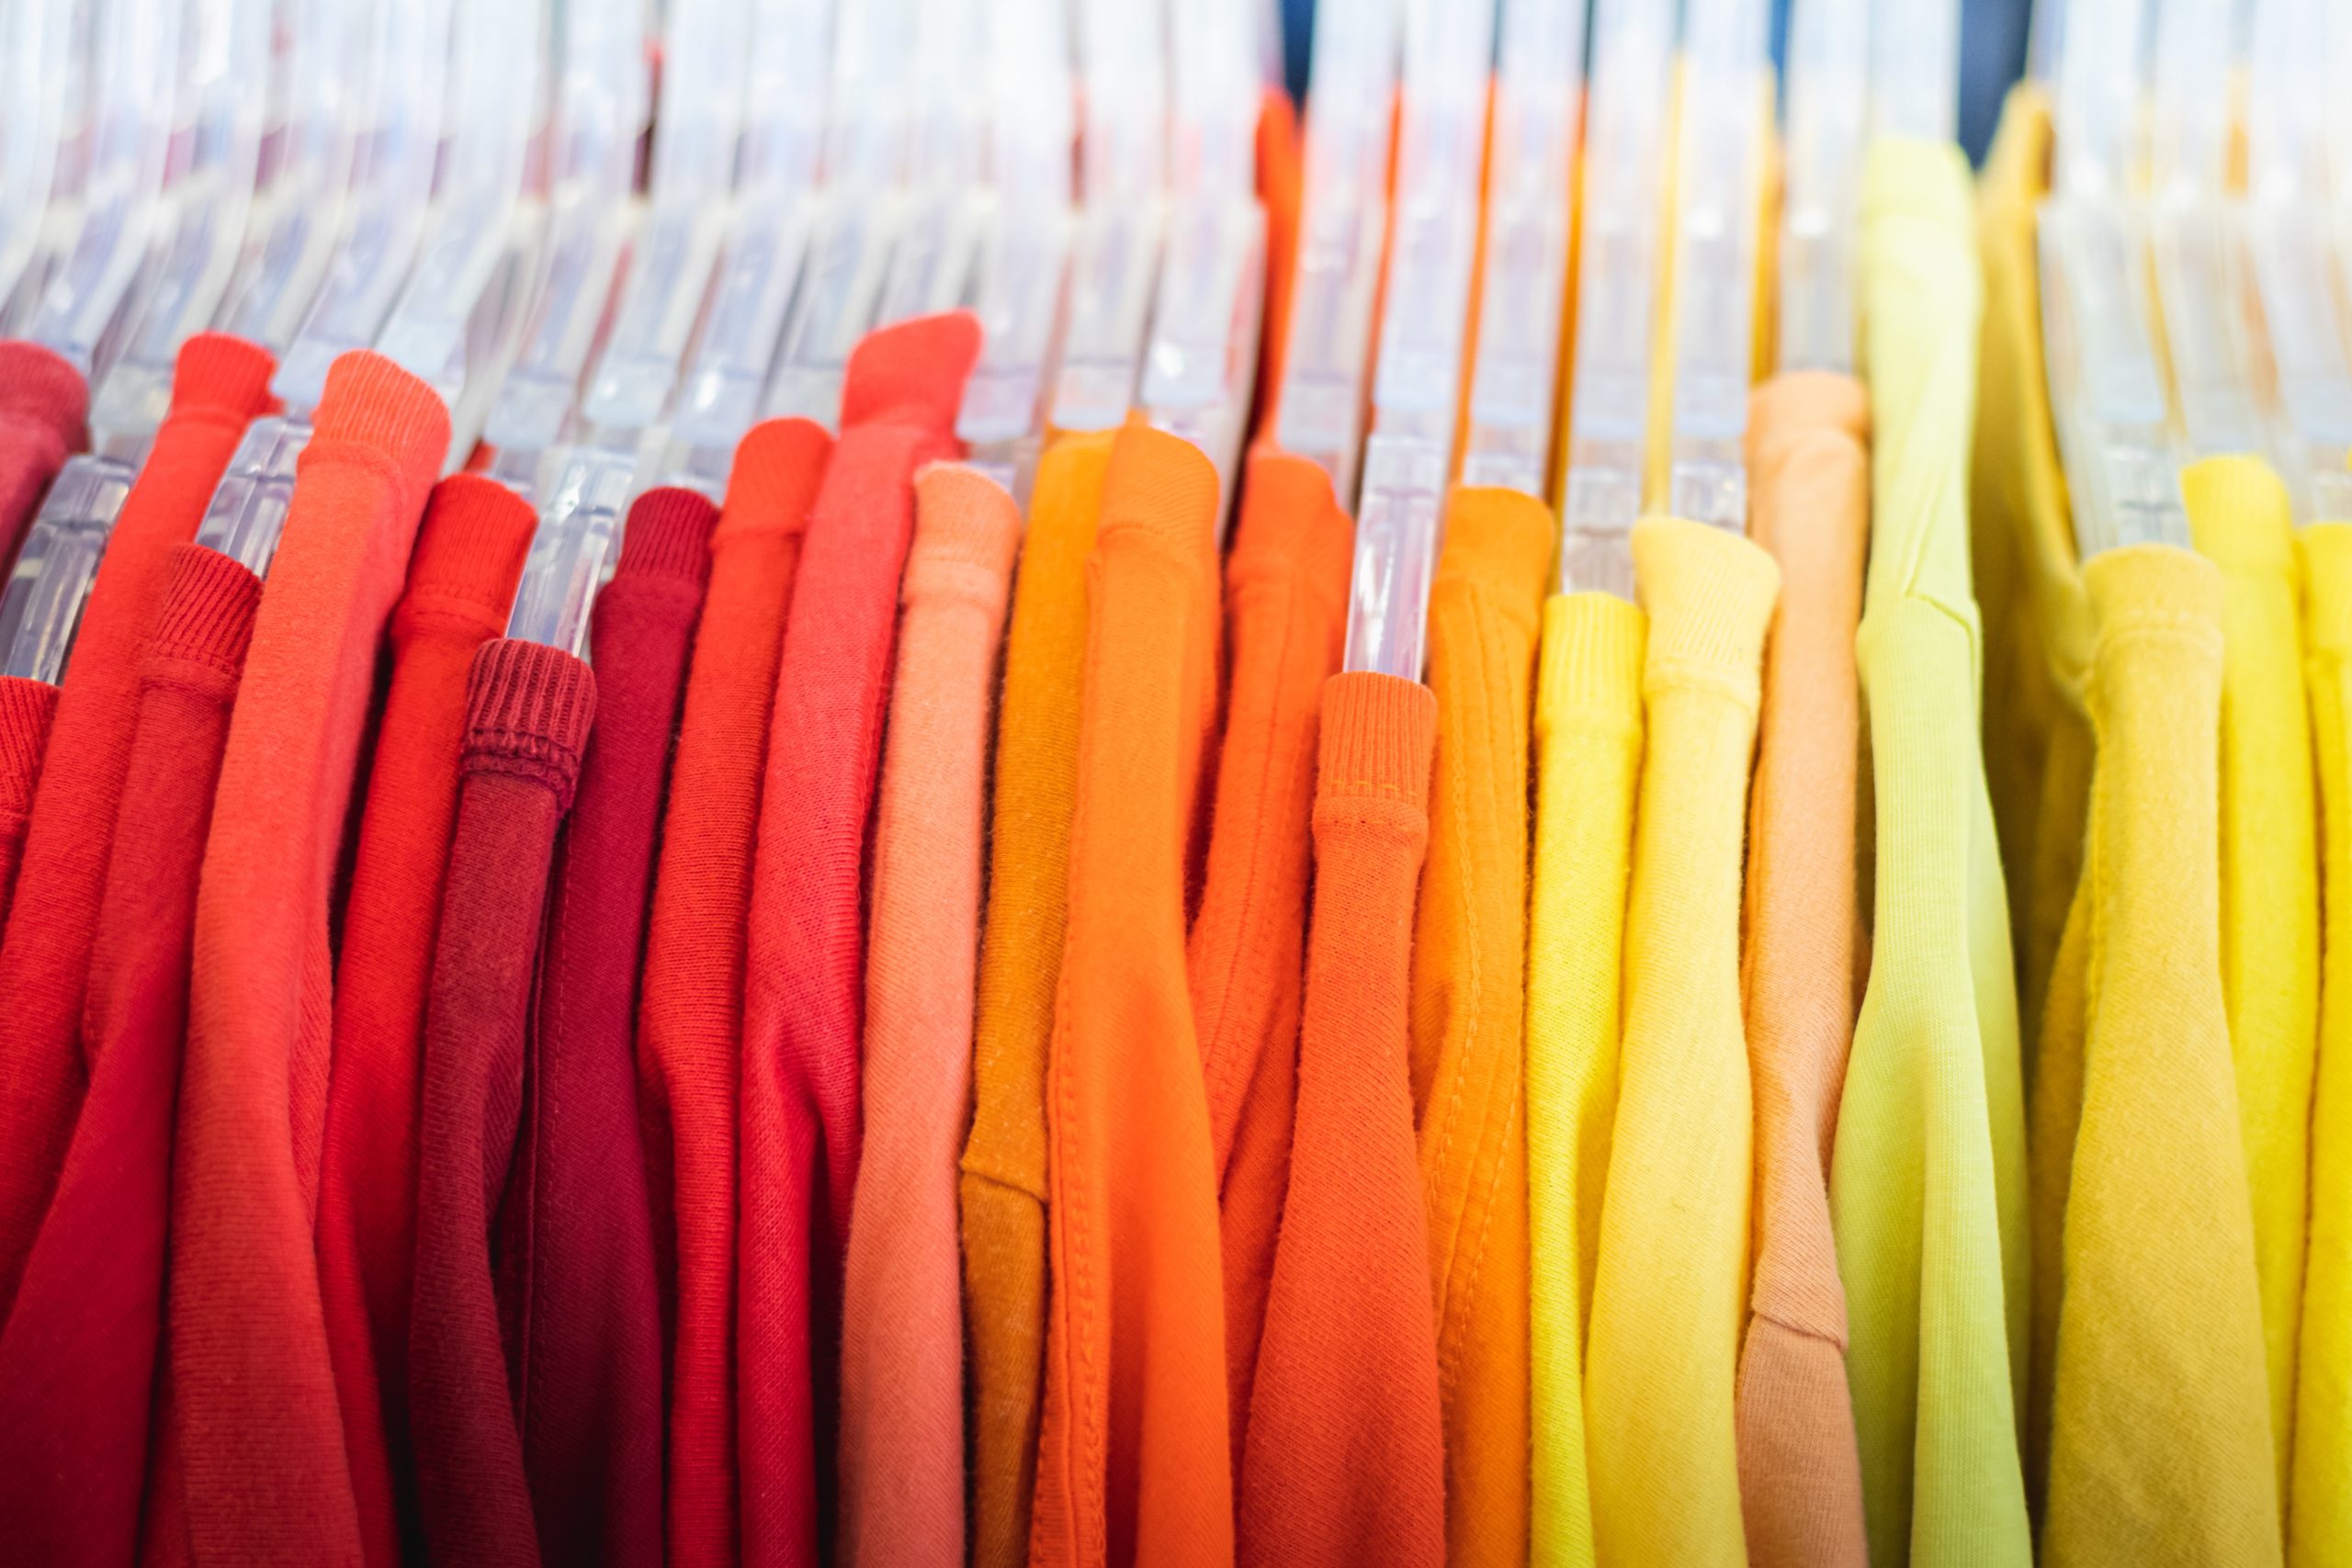 Brightly coloured clothes hanging on a rack in order of red on the left, orange in the middle, and yellow on the right